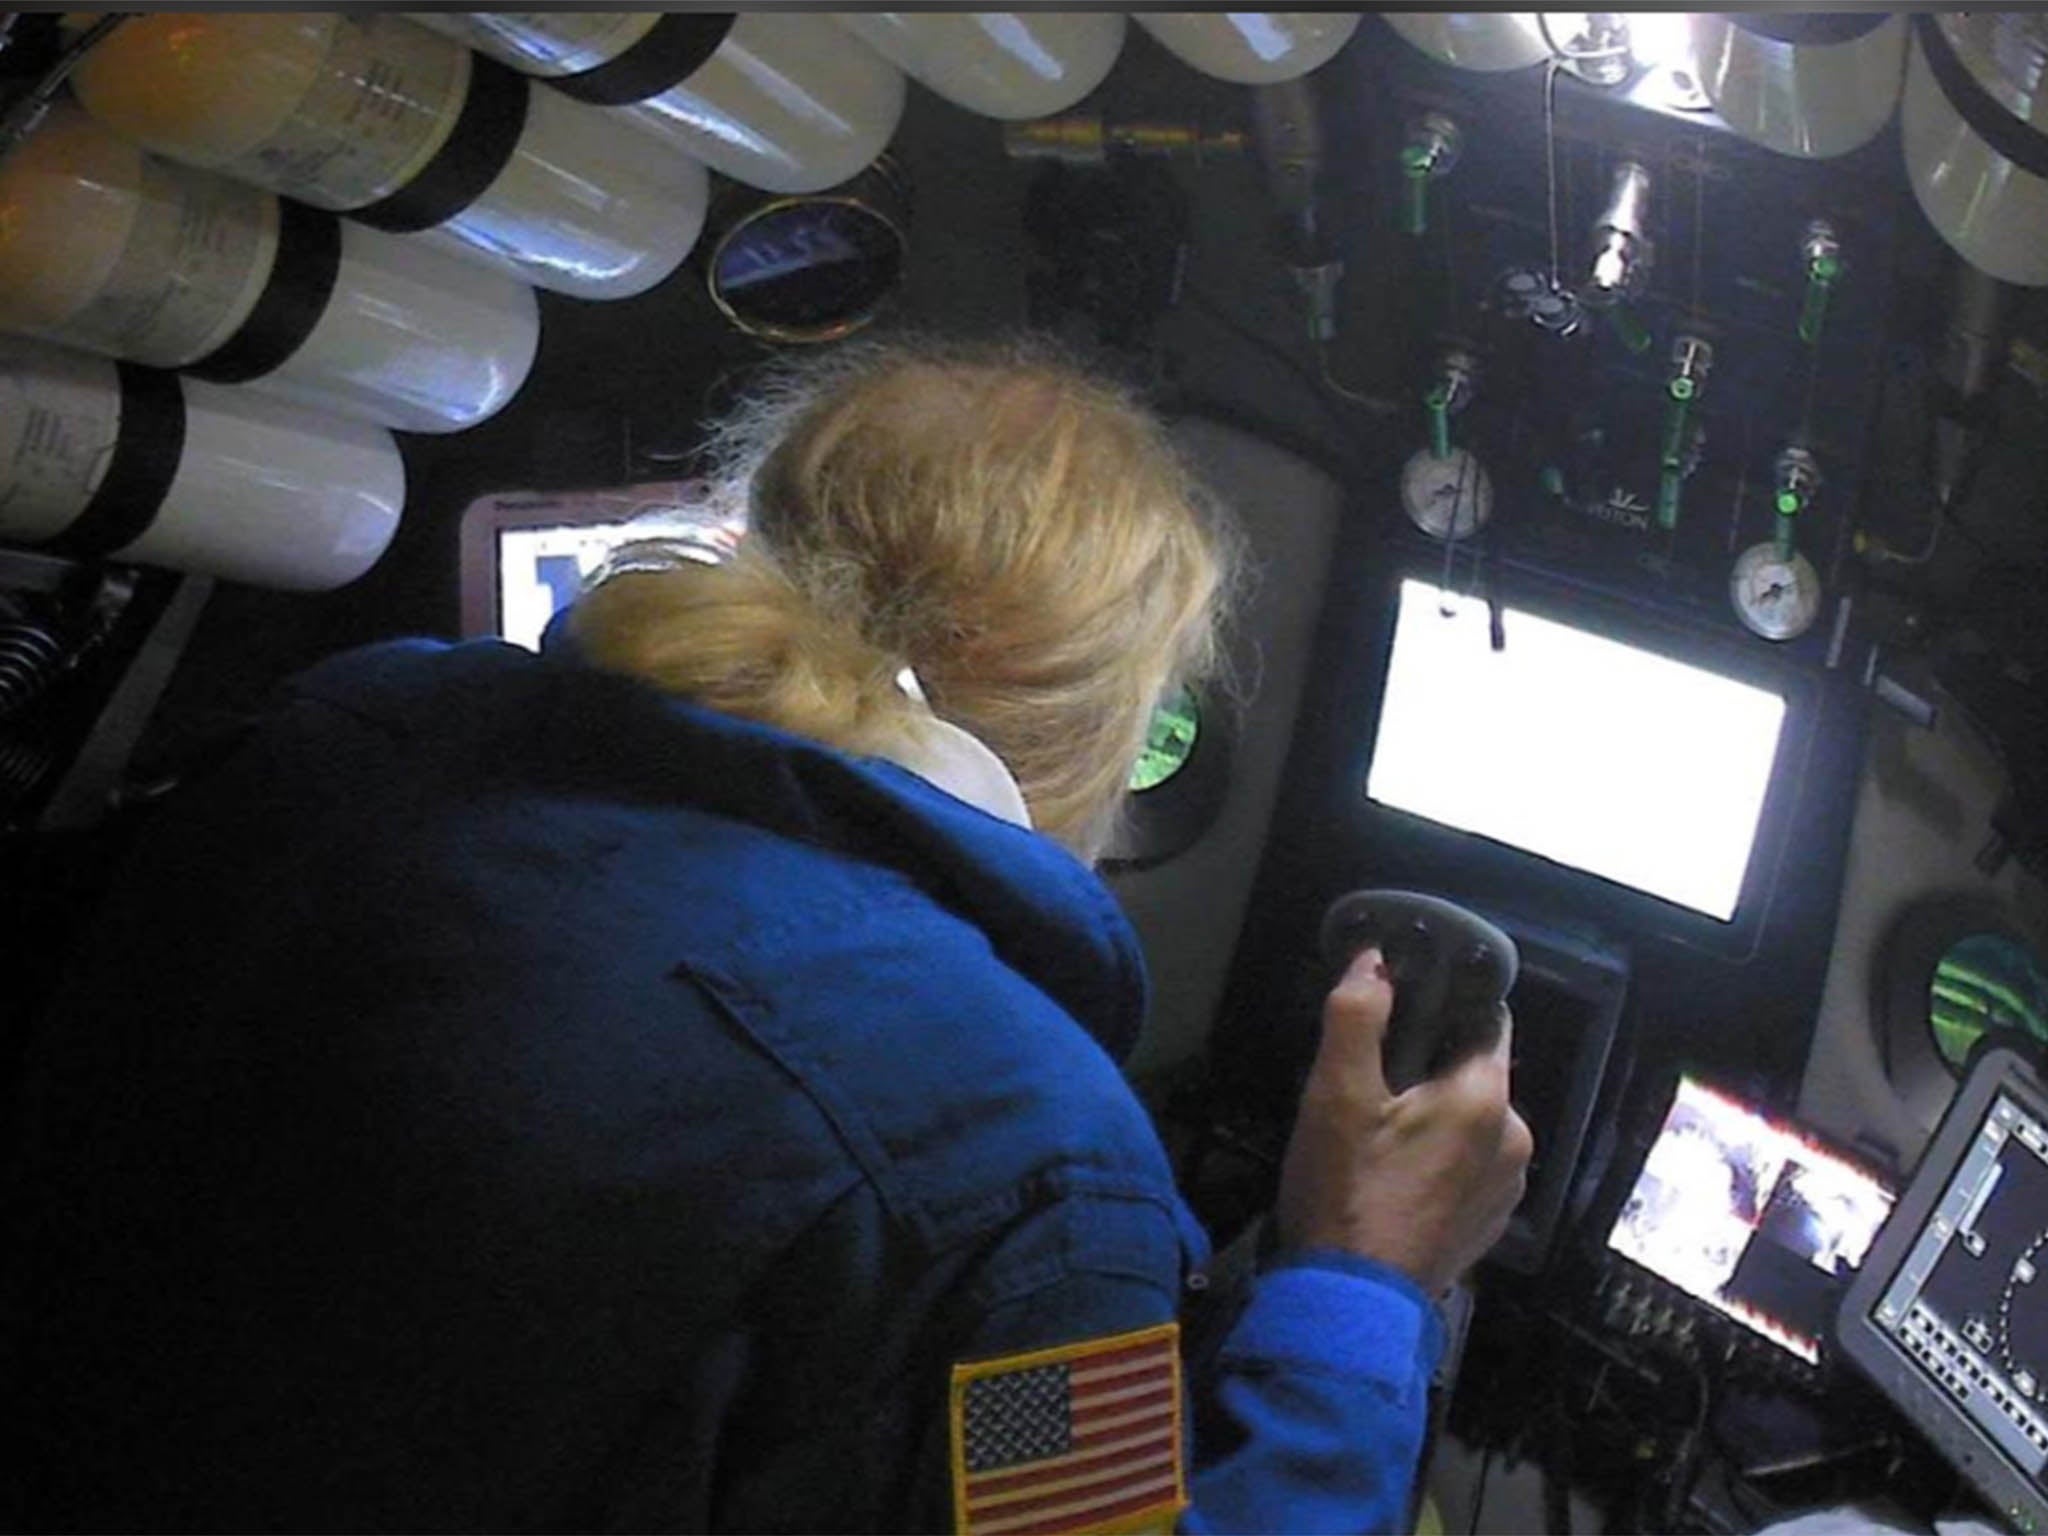 Deep-diving explorer Vescovo pilots the submarine DSV Limiting Factor in the Pacific